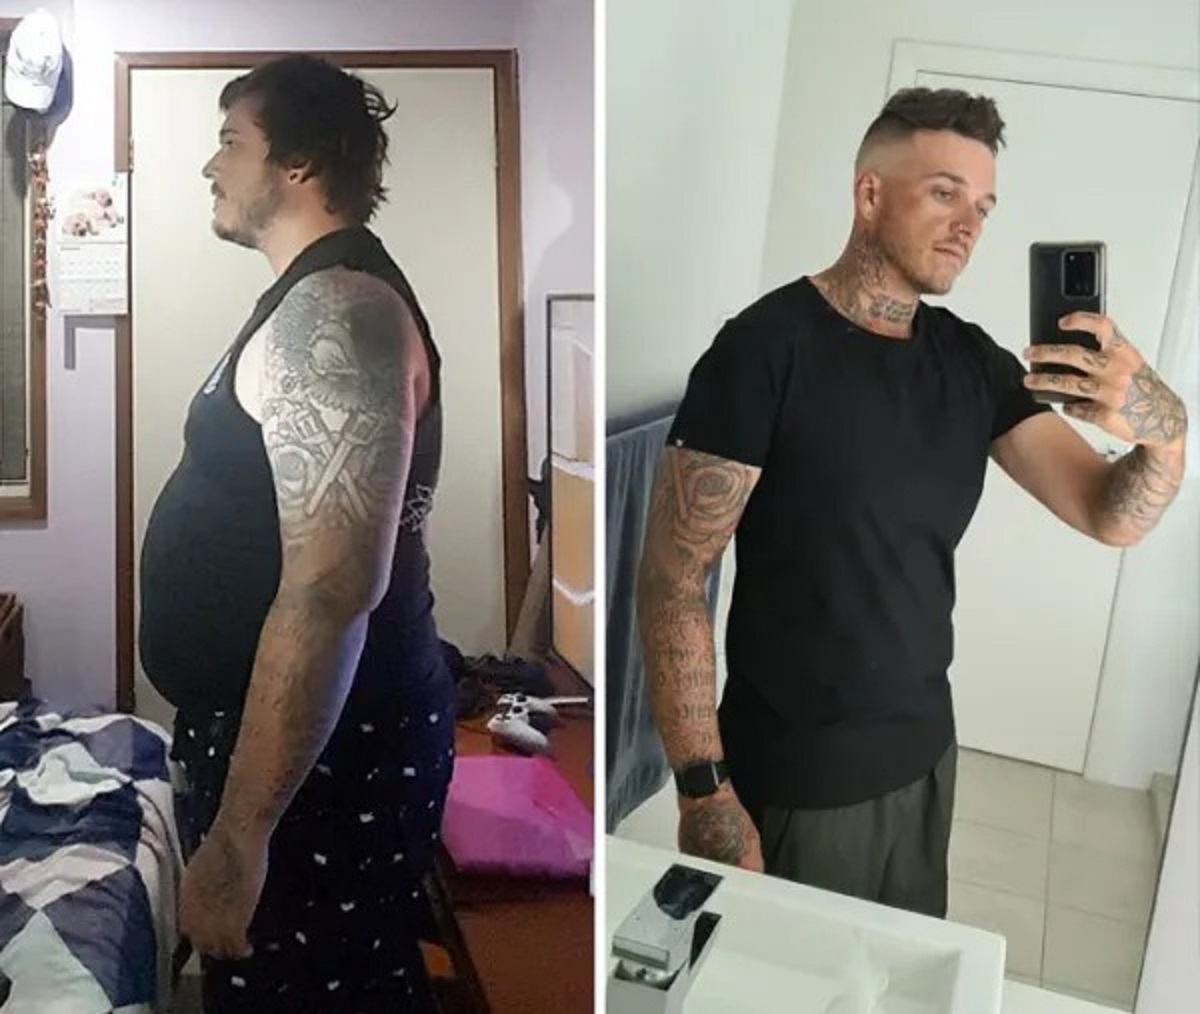 “One year sober and 37 kg (81 lbs) down! This is the longest I’ve gone without alcohol since I was 15, and I’m now 29”